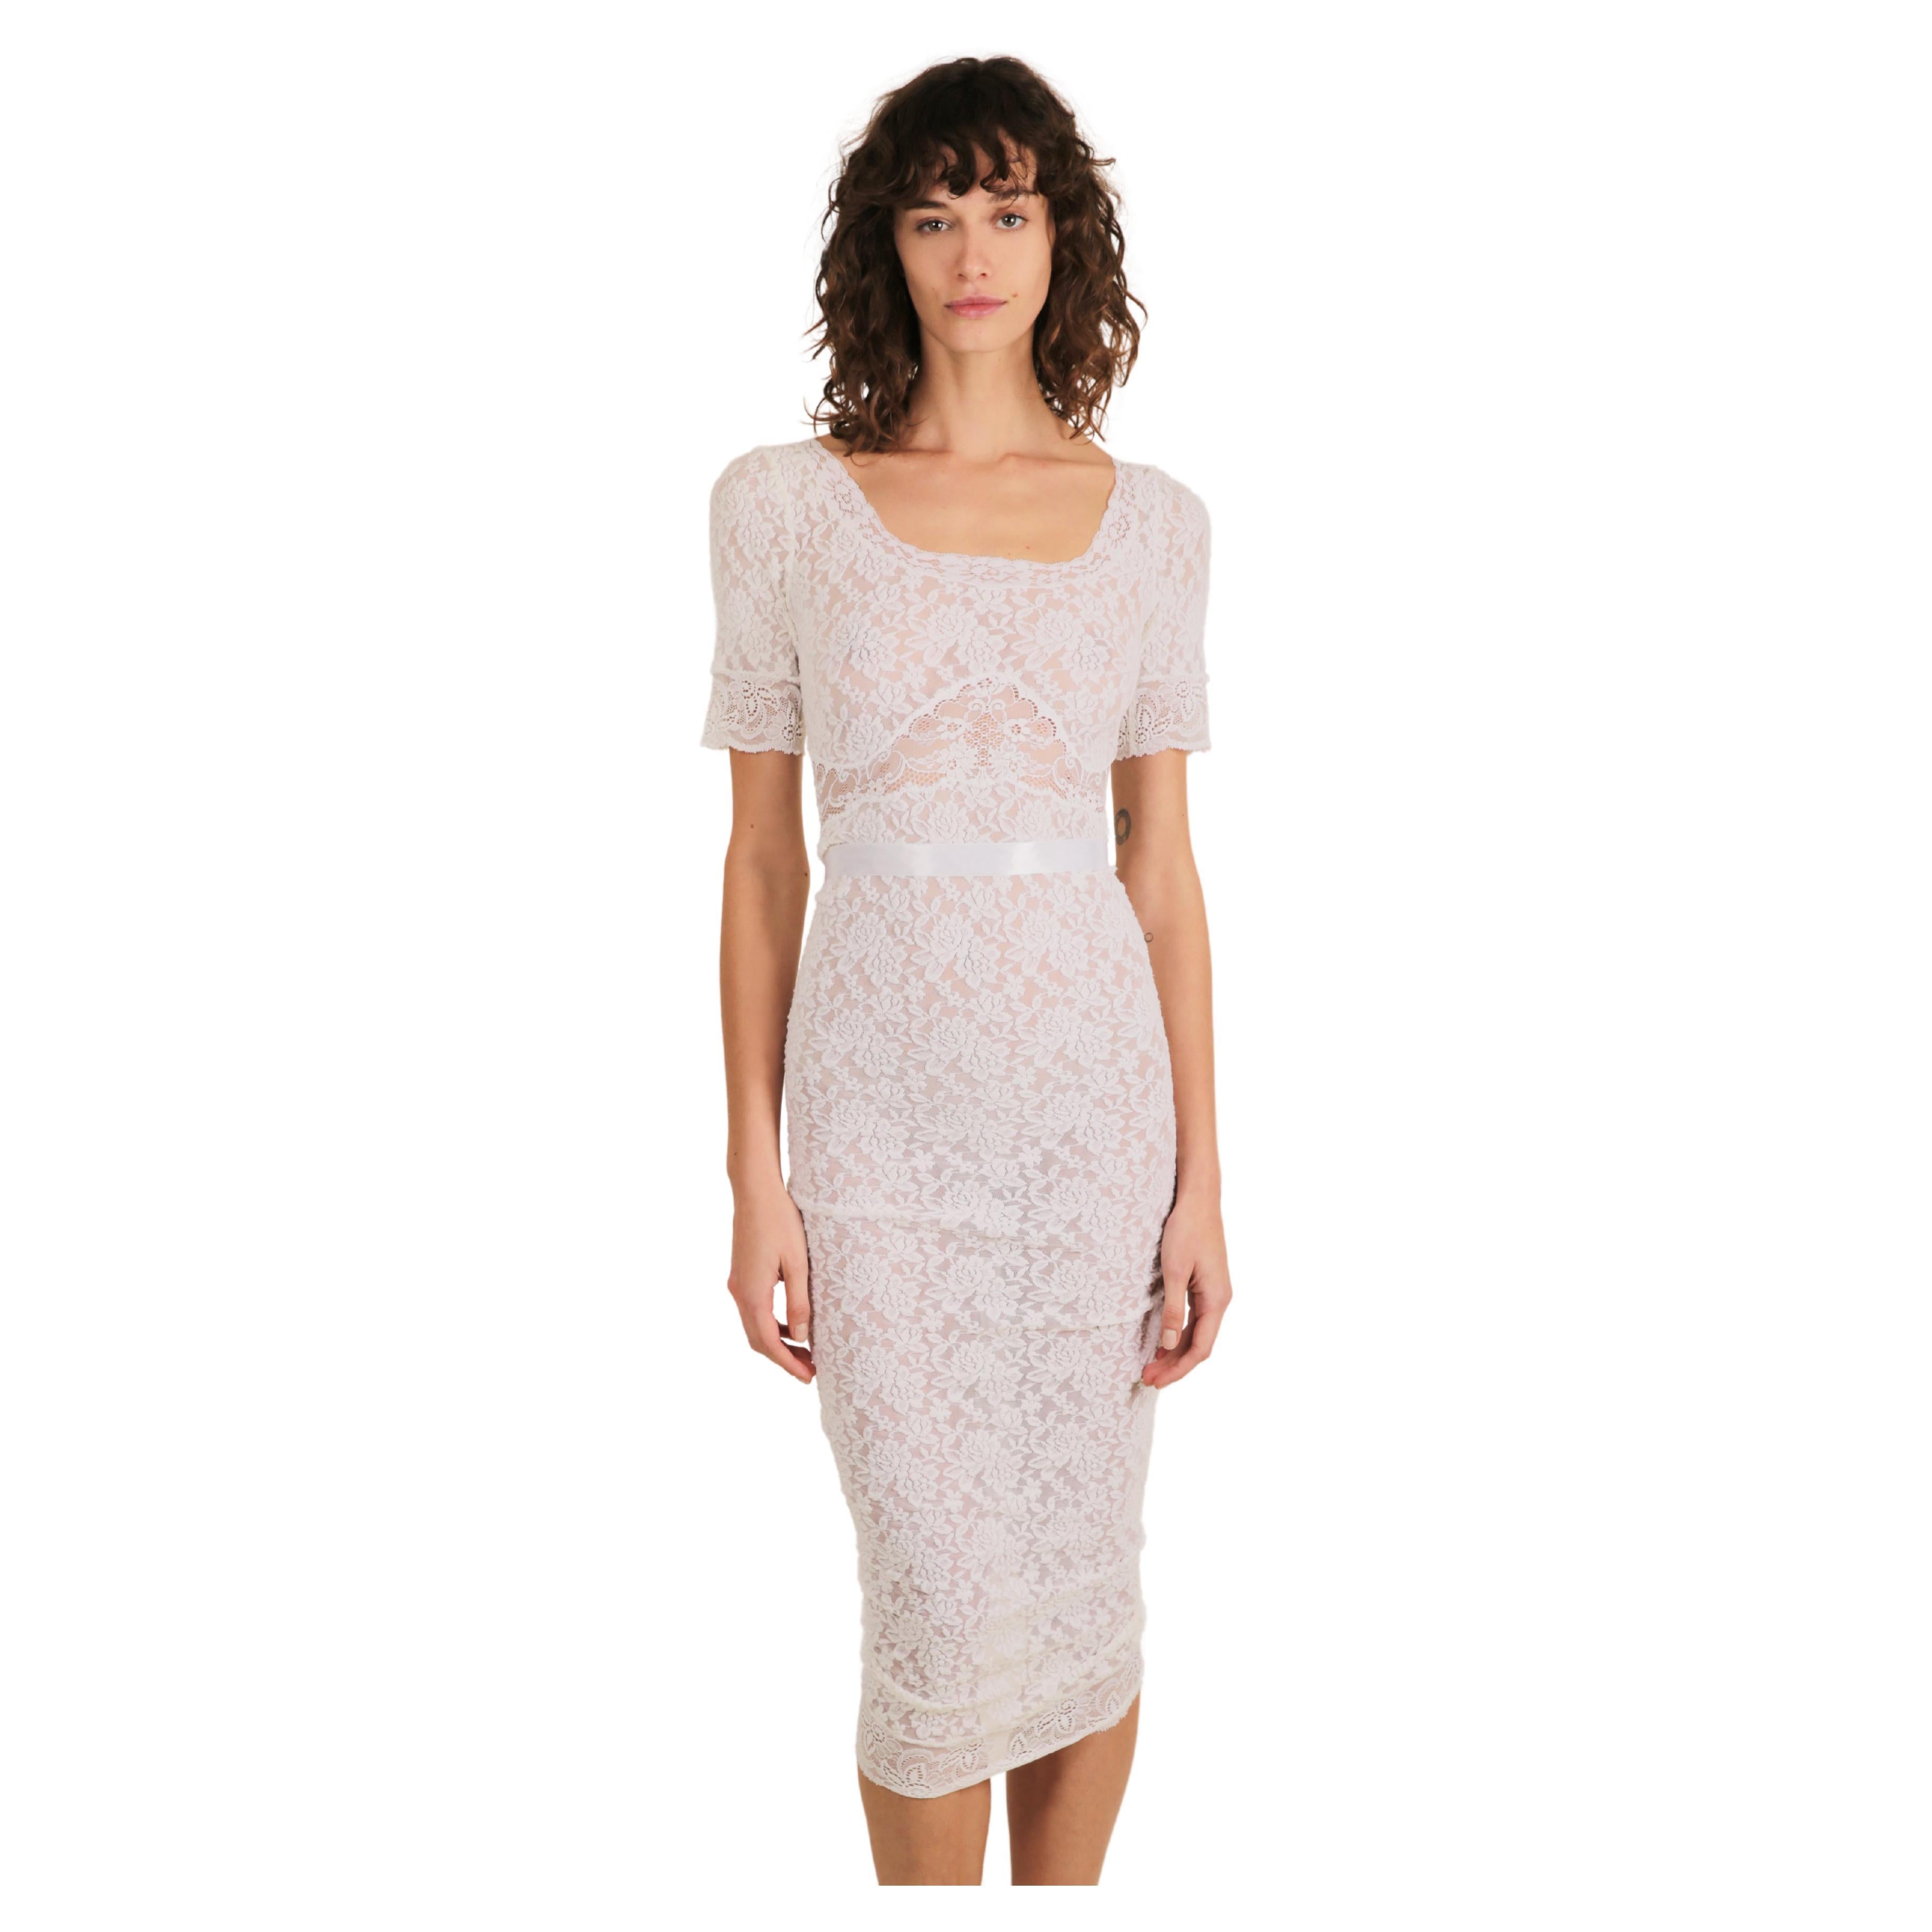 Dolce & Gabbana D&G S/S 2006 white lace sheer ribbon body con dress For Sale